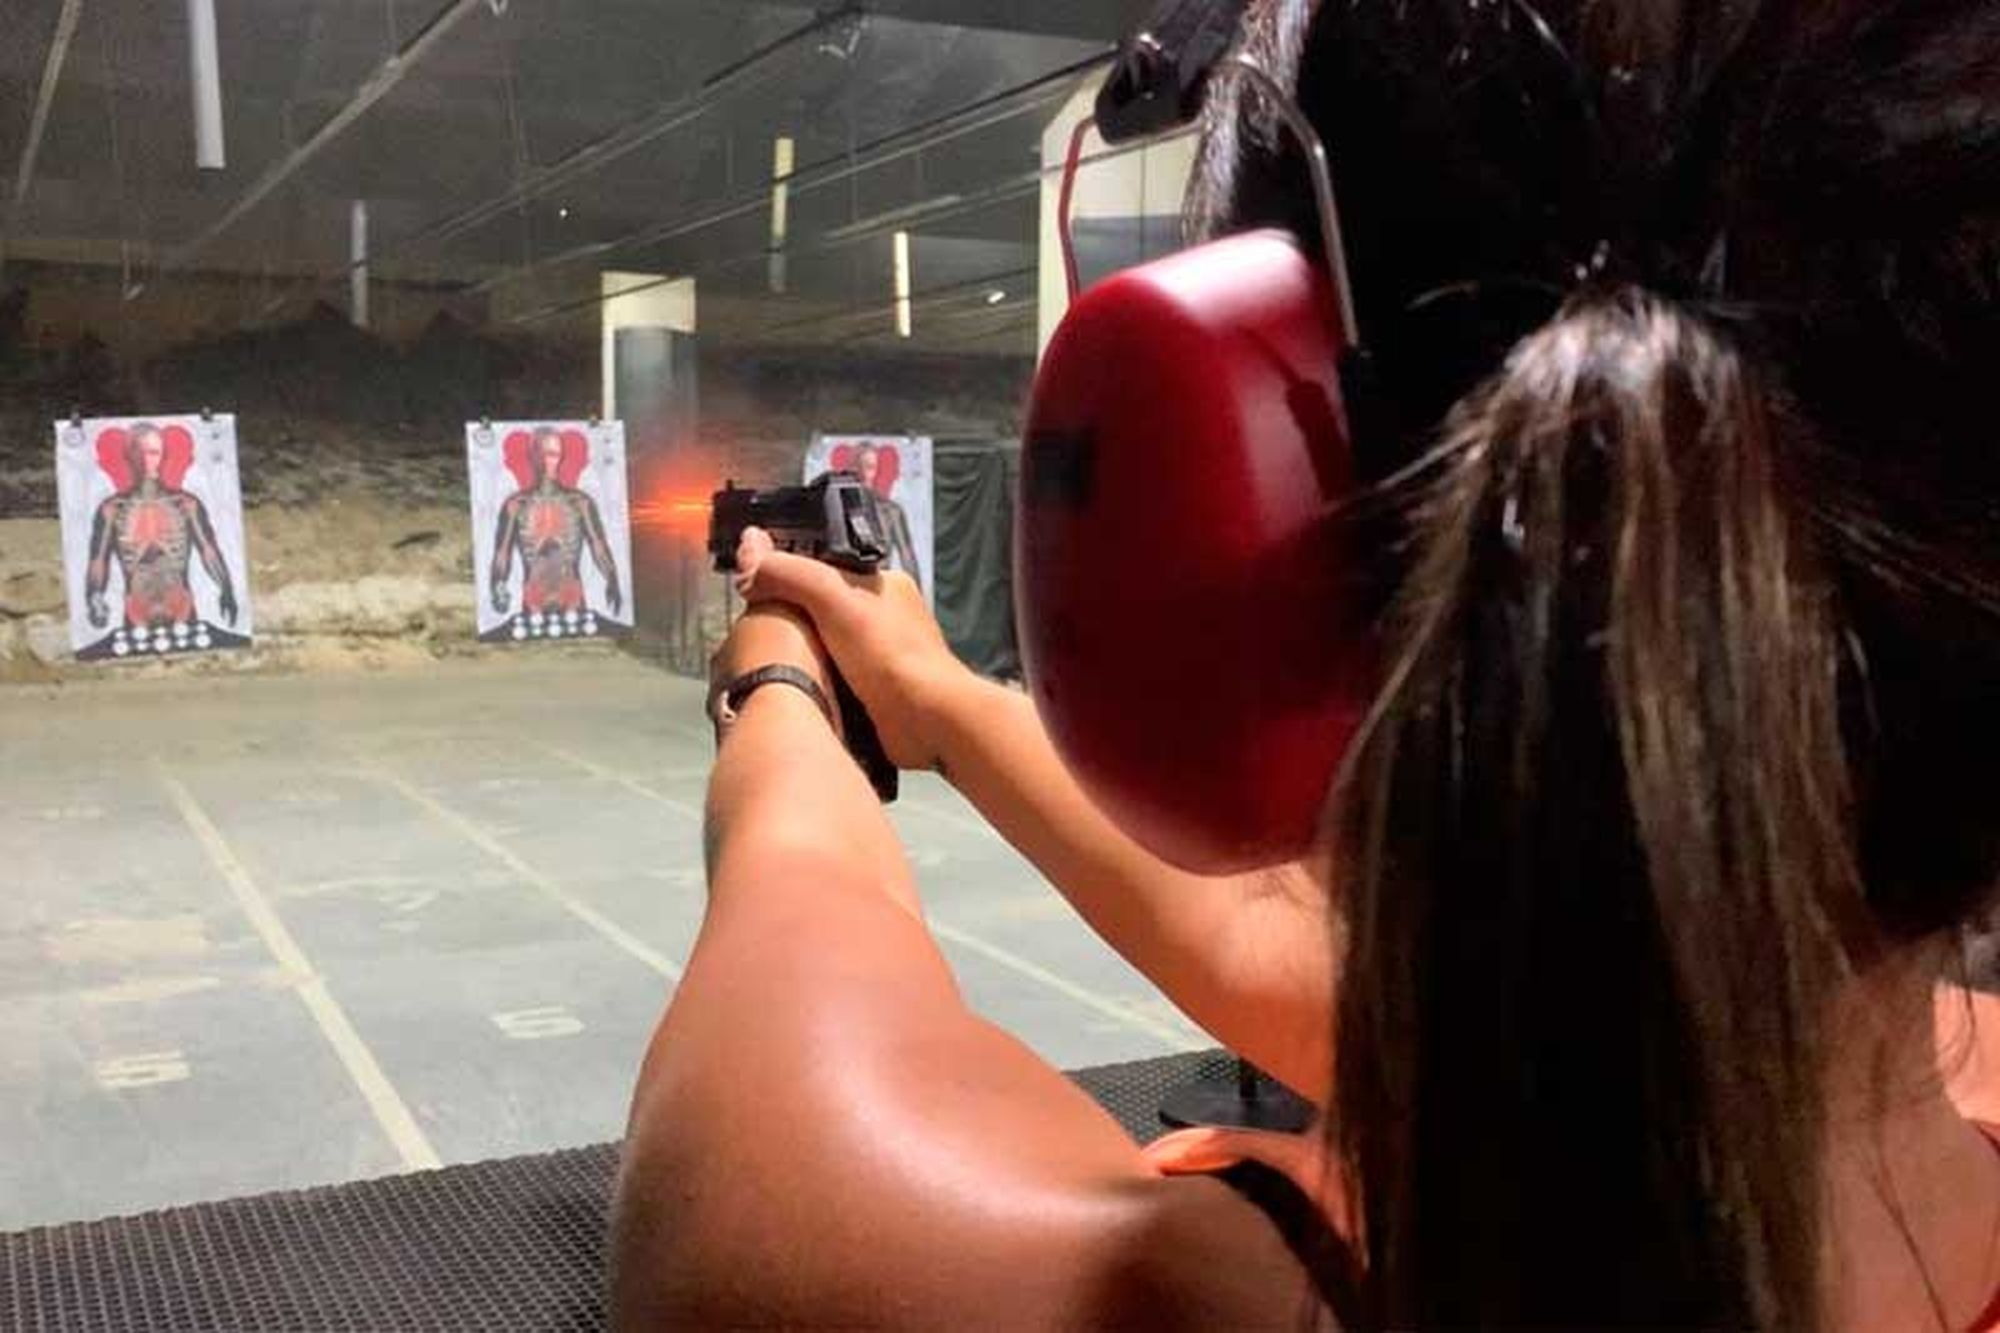 A young woman practices shooting in a gun club in Brazil.